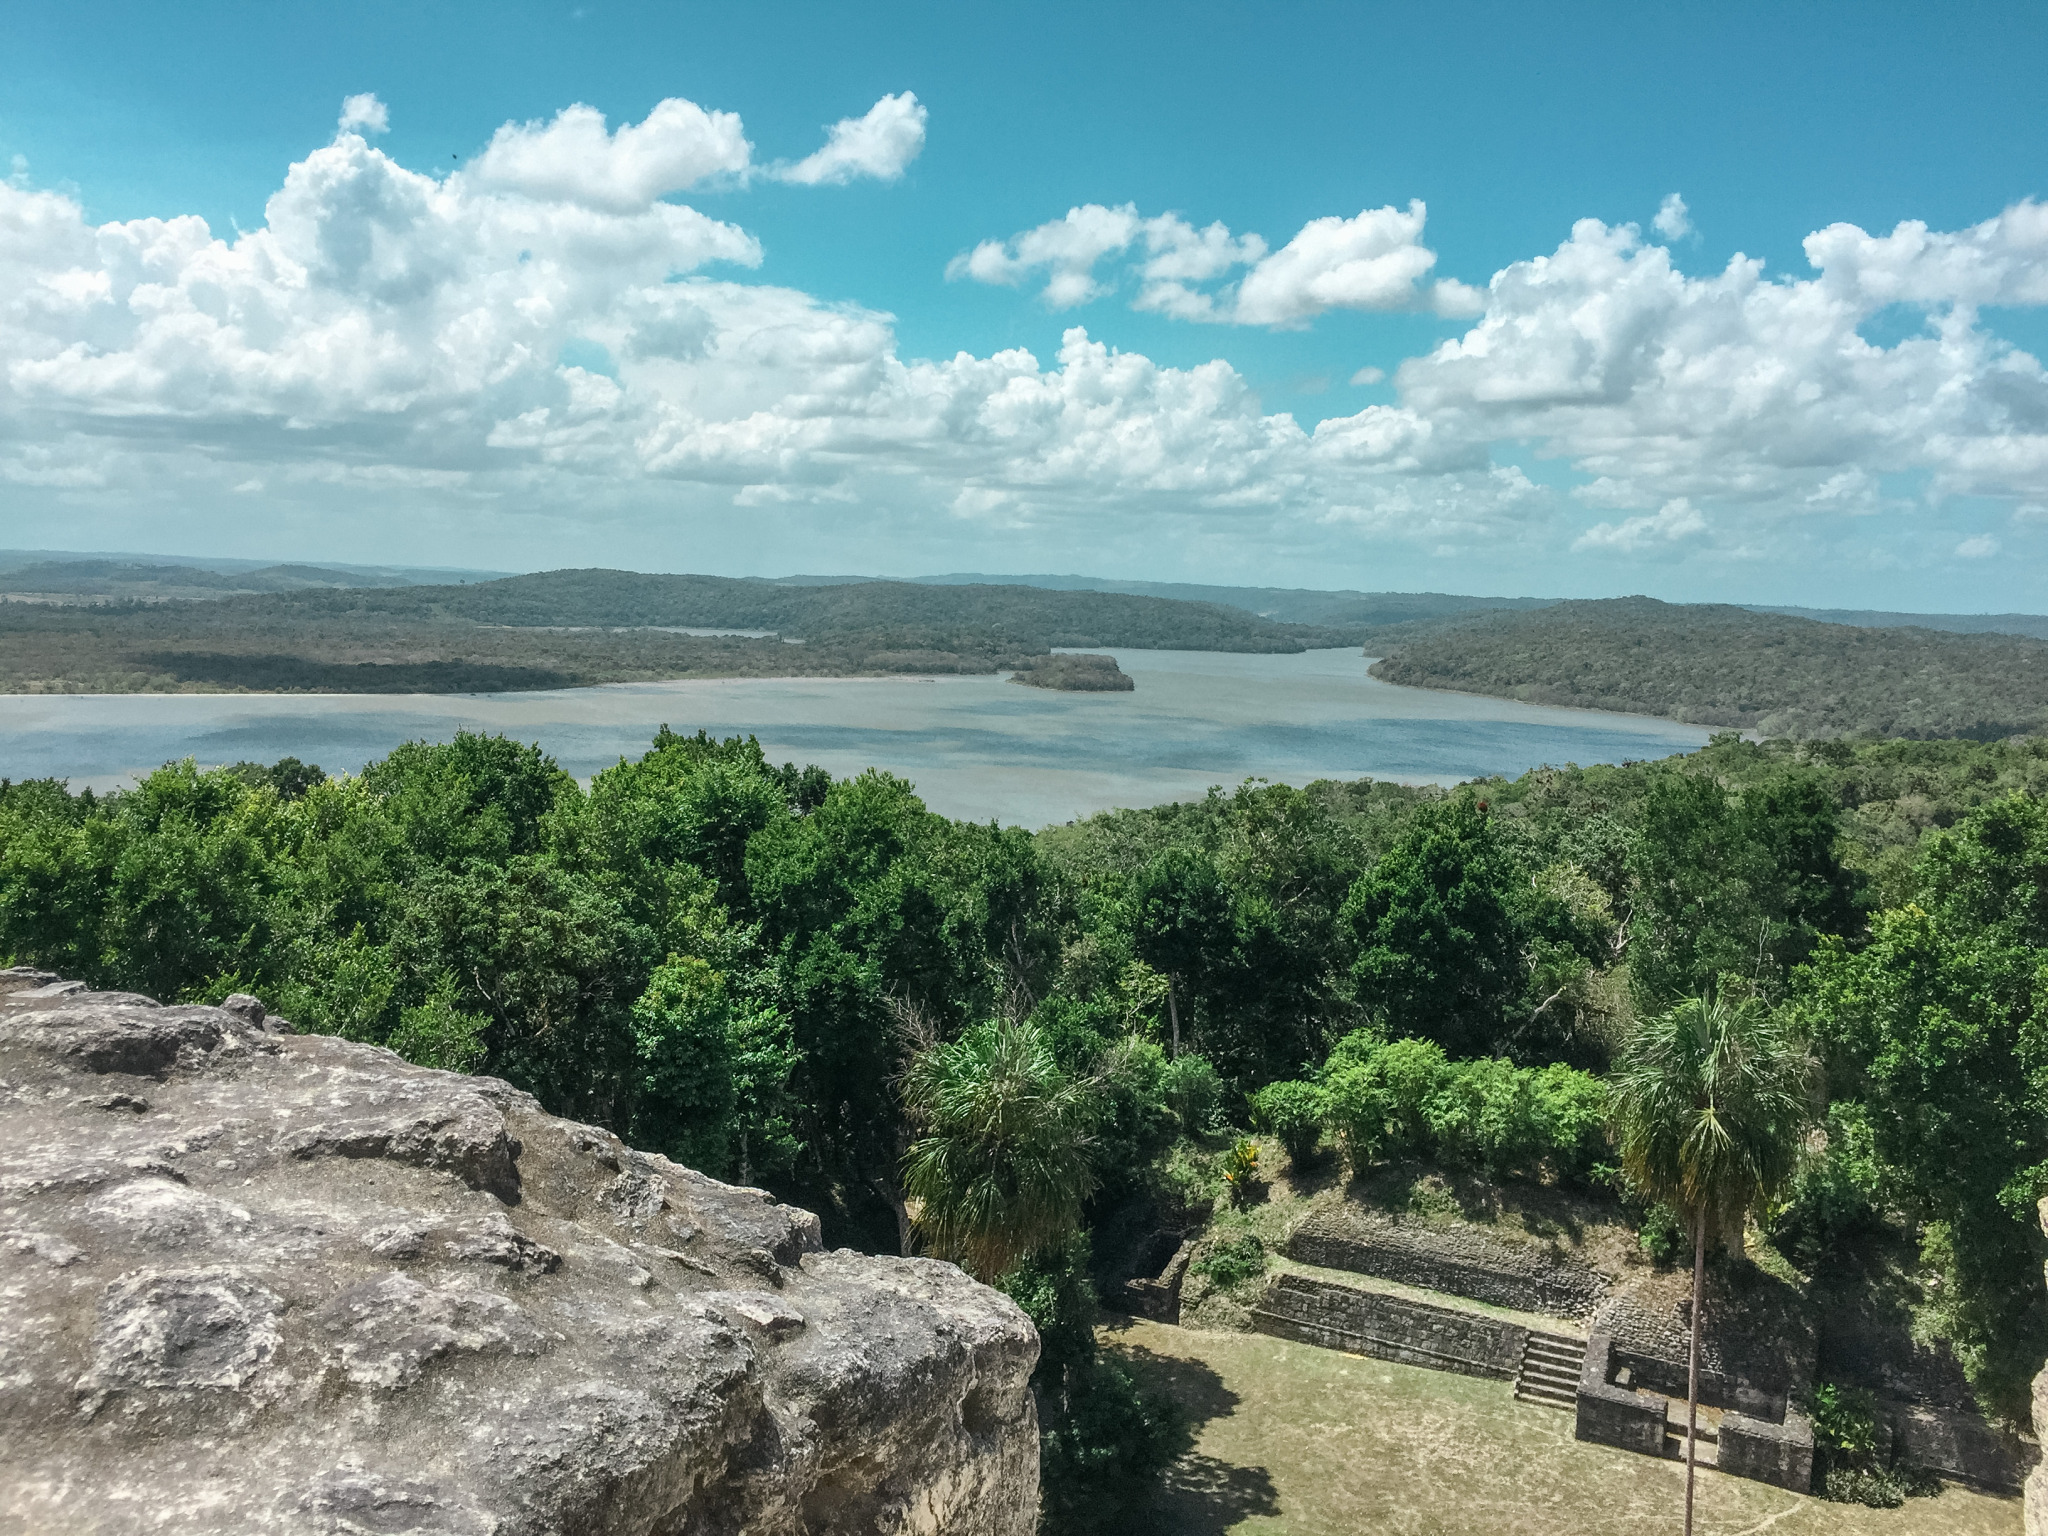 Best guide to visiting the Yaxhá Mayan ruins in Guatemala